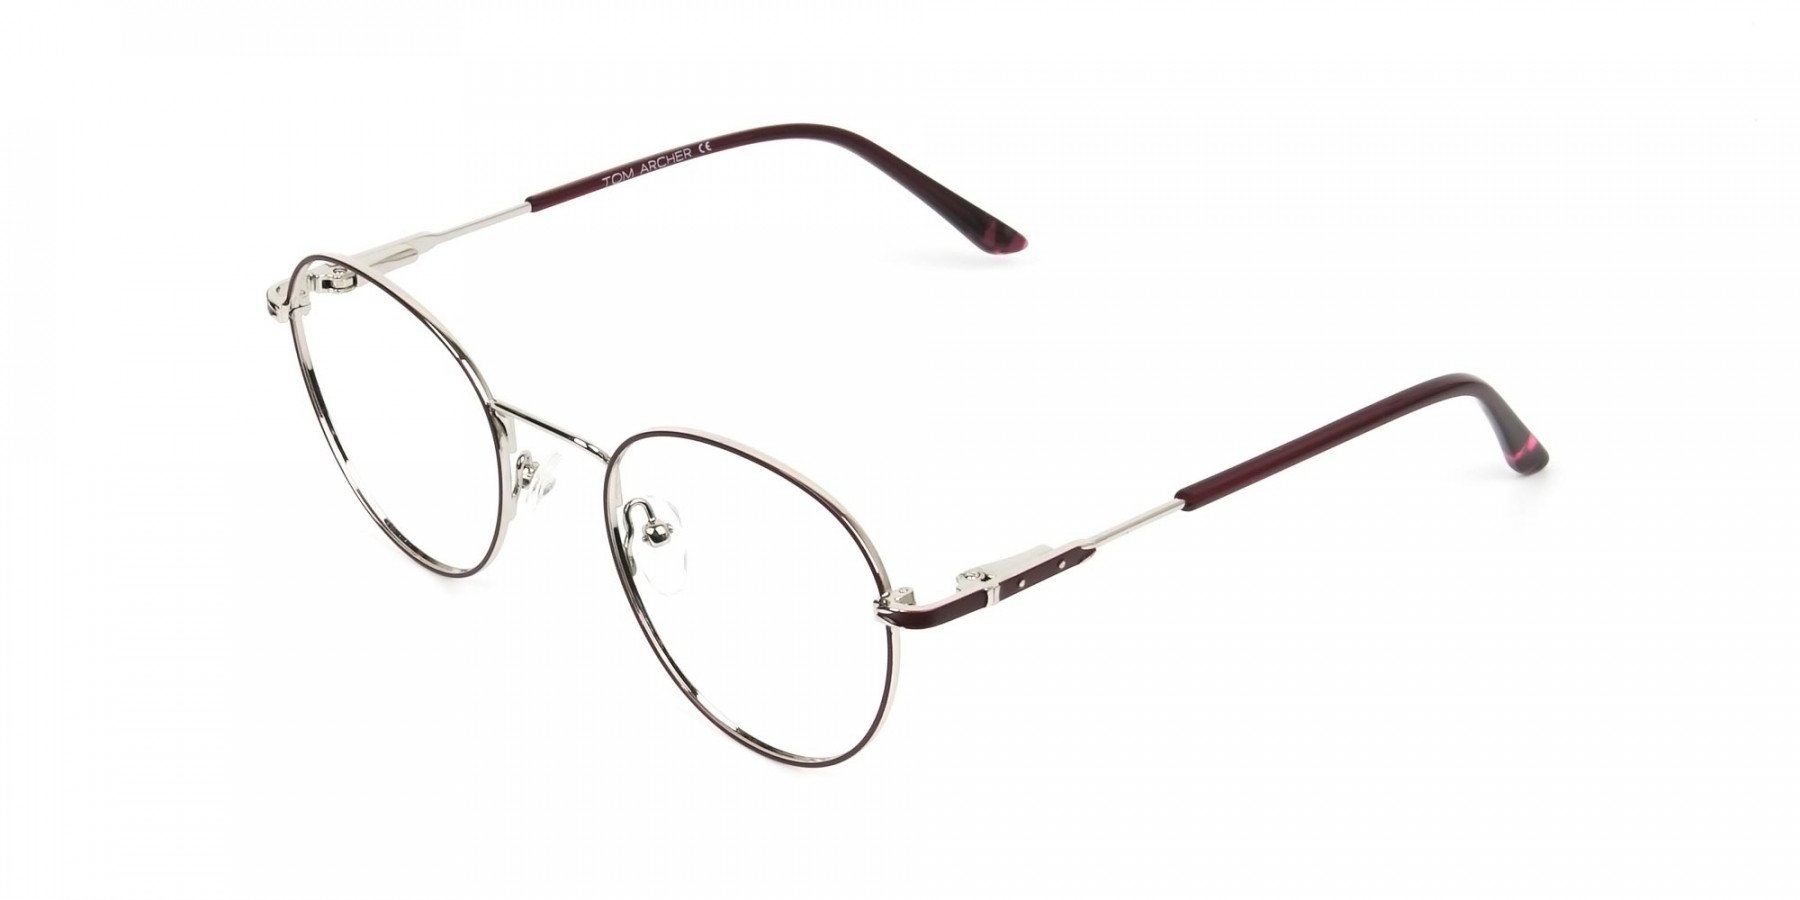 Silver, Burgundy & Purple Round Spectacles - 1